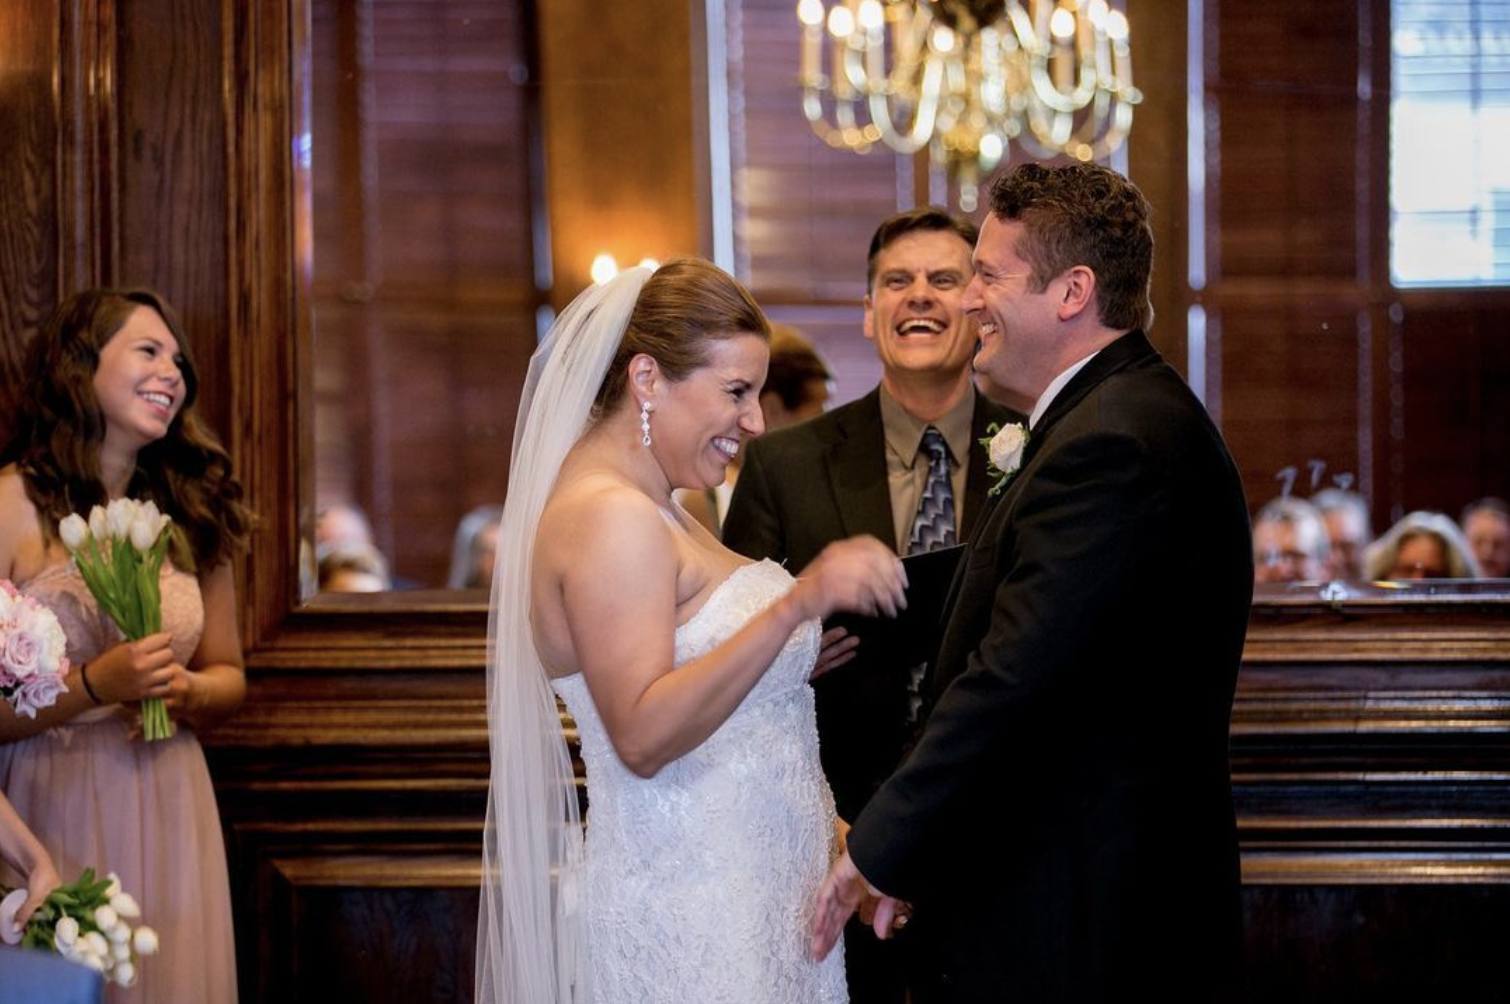 Bride and groom laugh during wedding ceremony